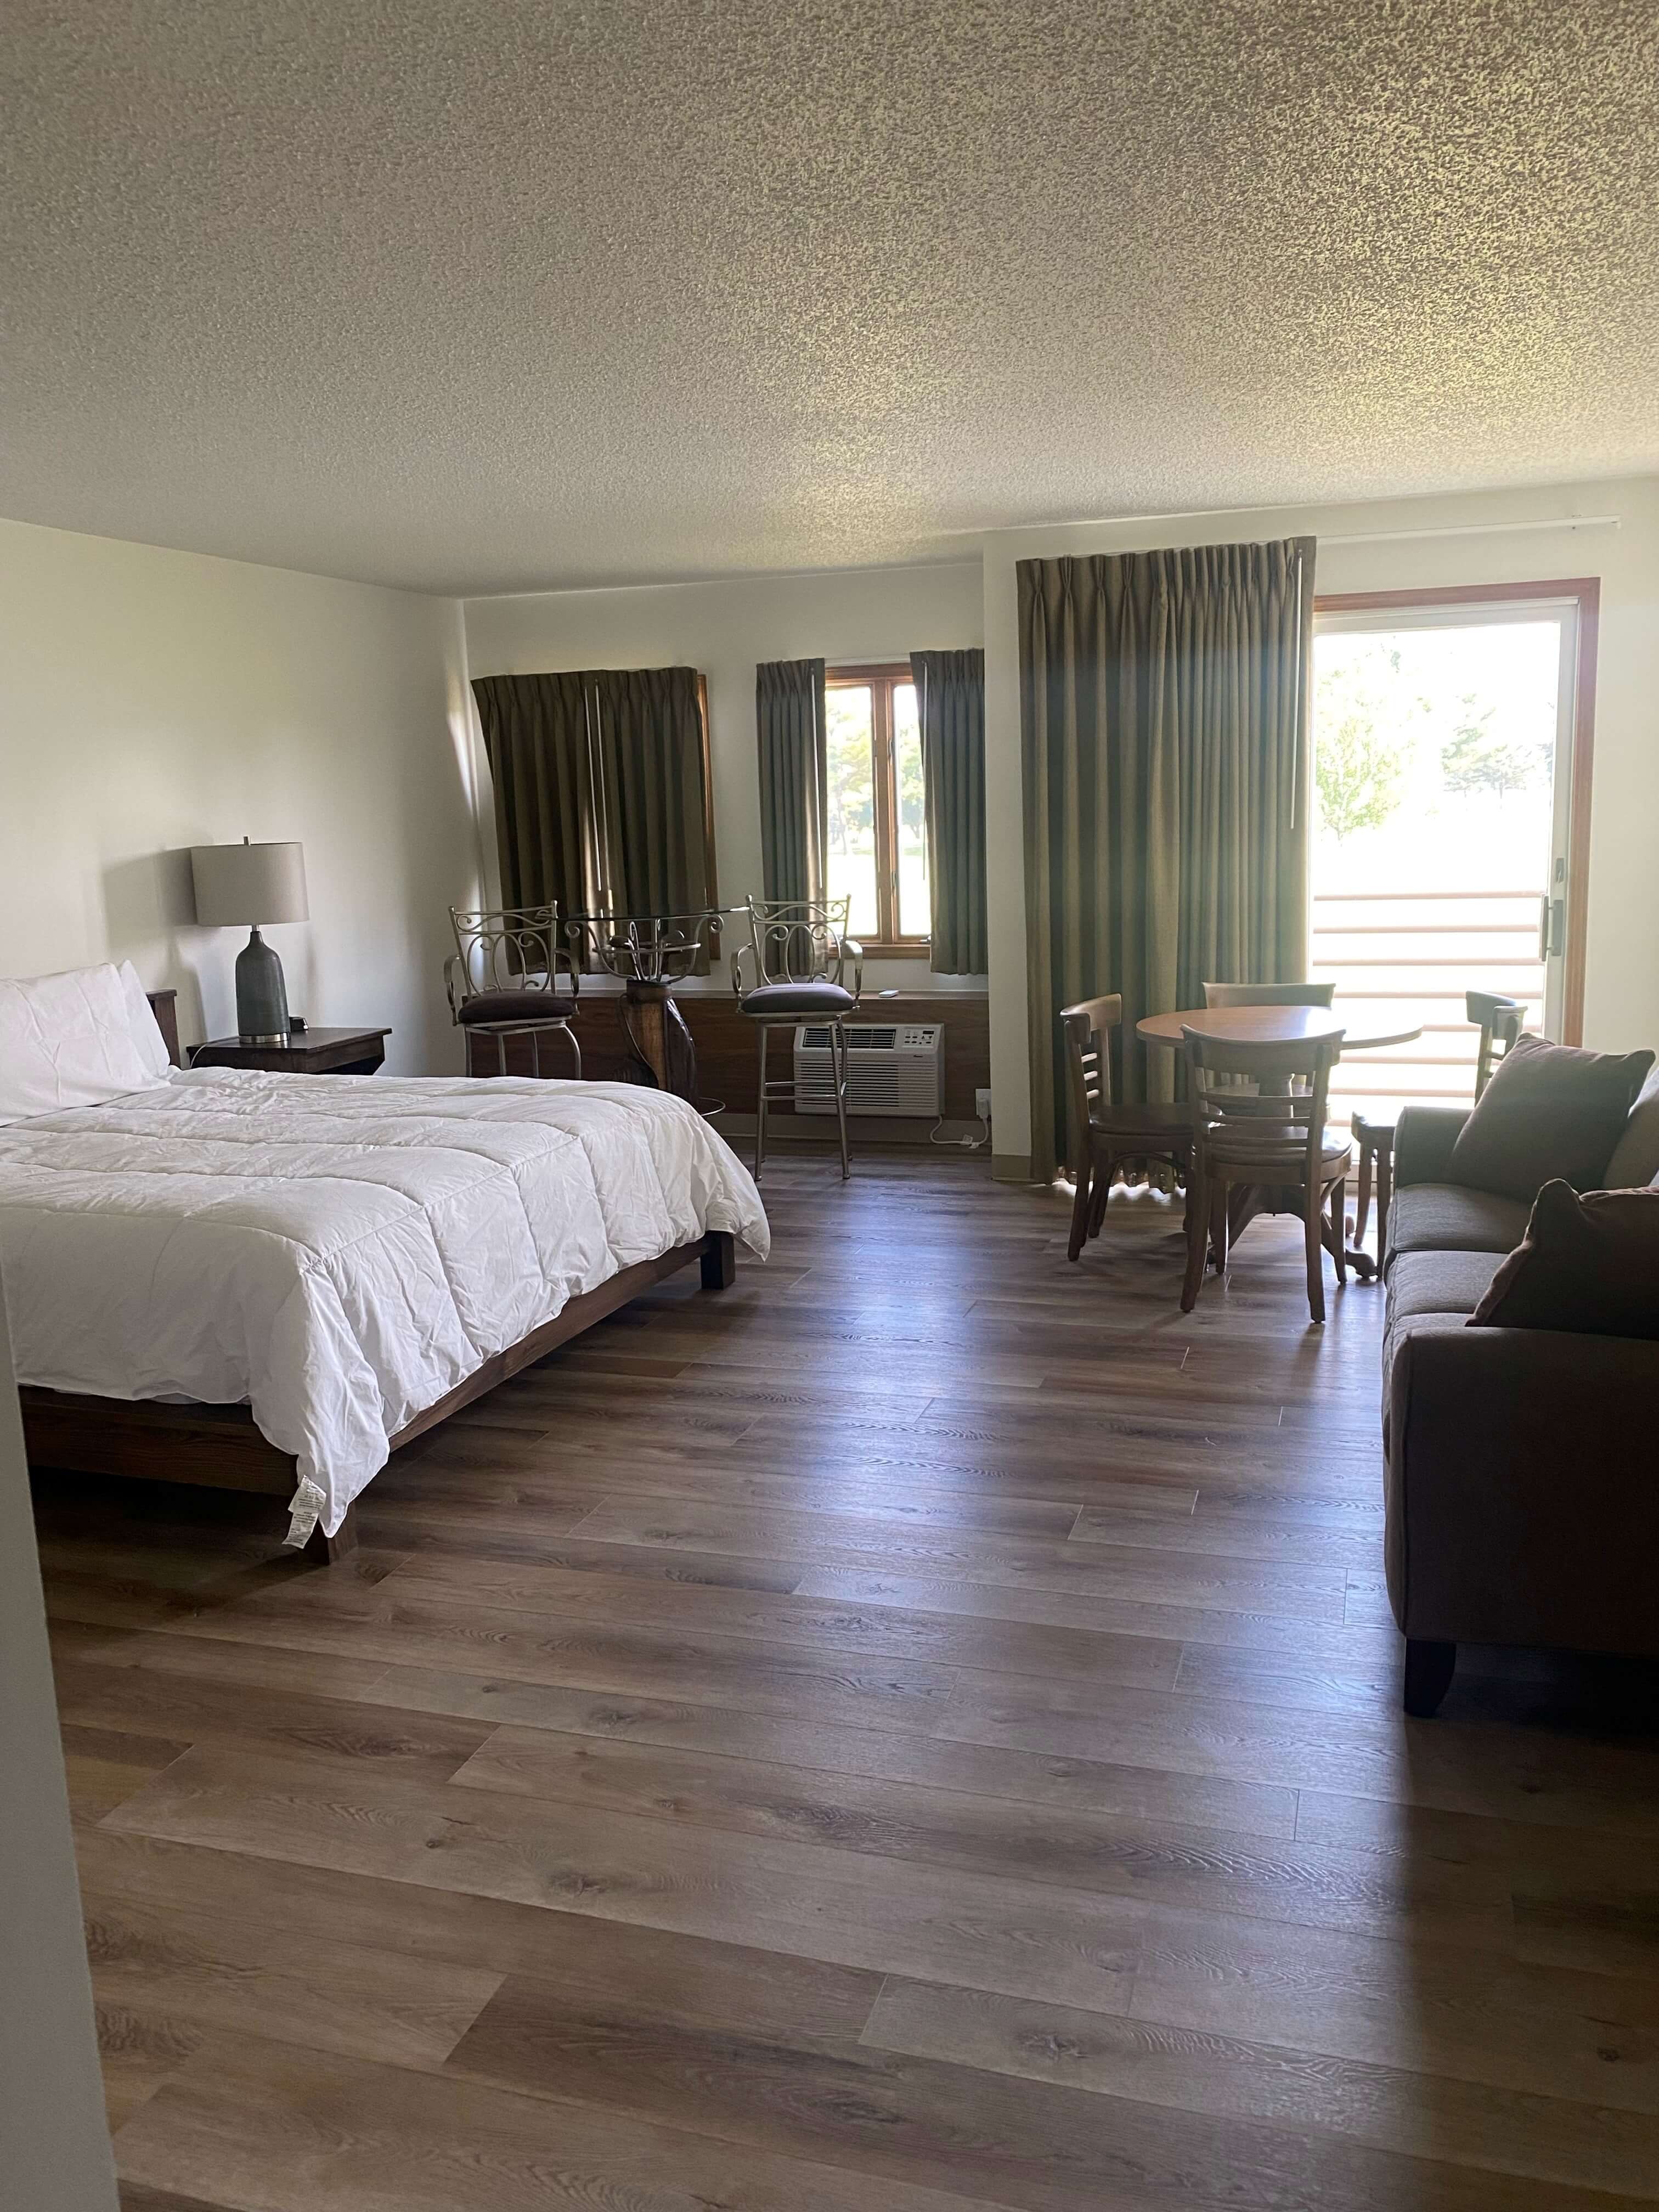 Deluxe King Room Available at Lakeview Hills Country Club